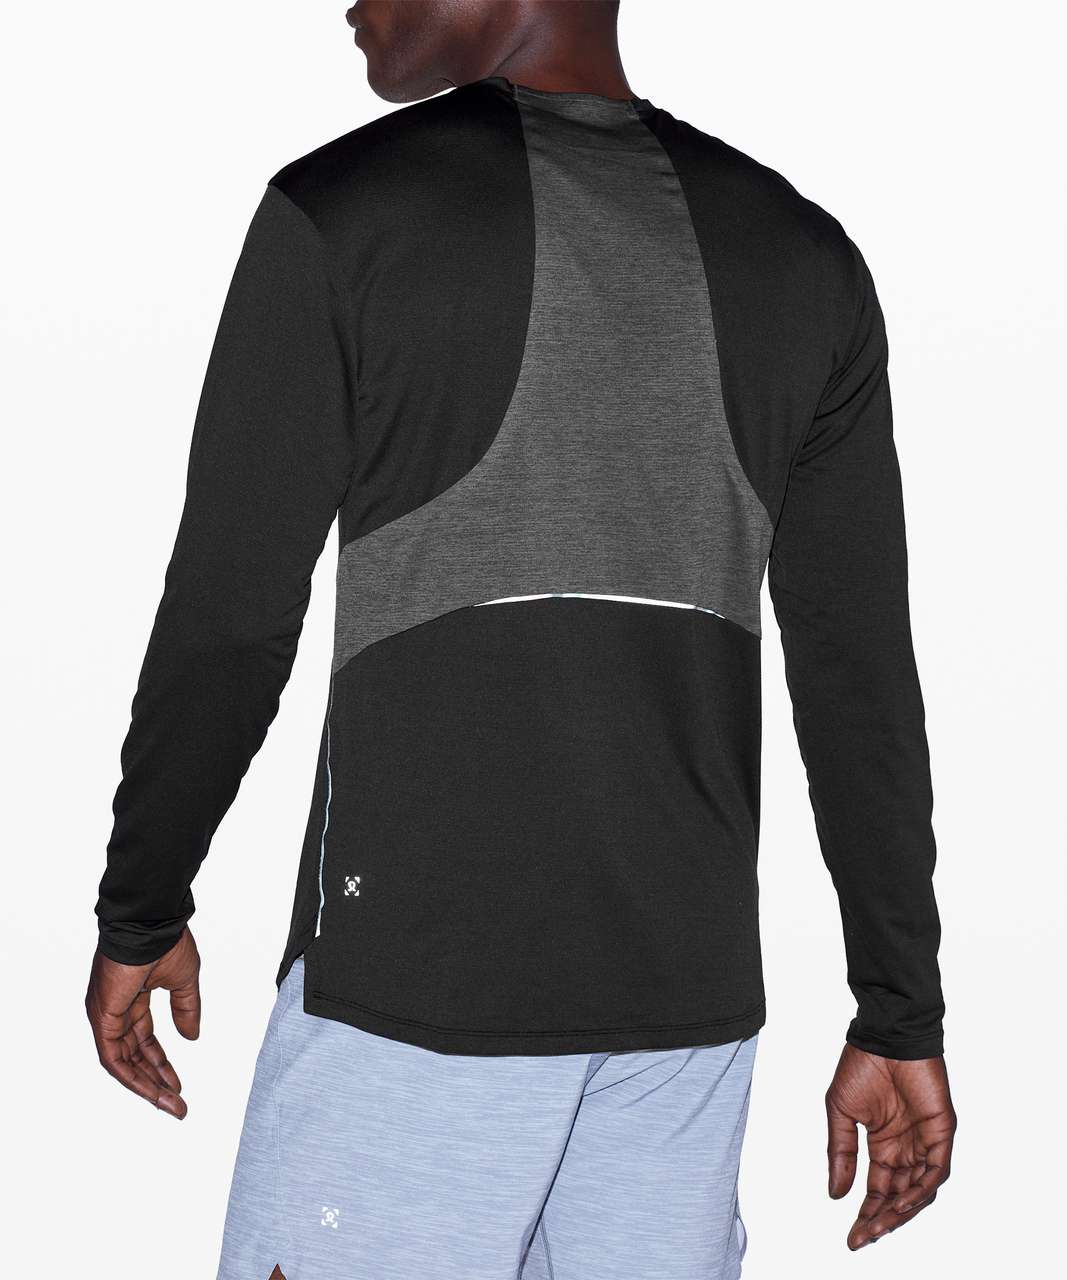 Lululemon Fast and Free Long Sleeve - Black / Heathered Obsidian (First Release)